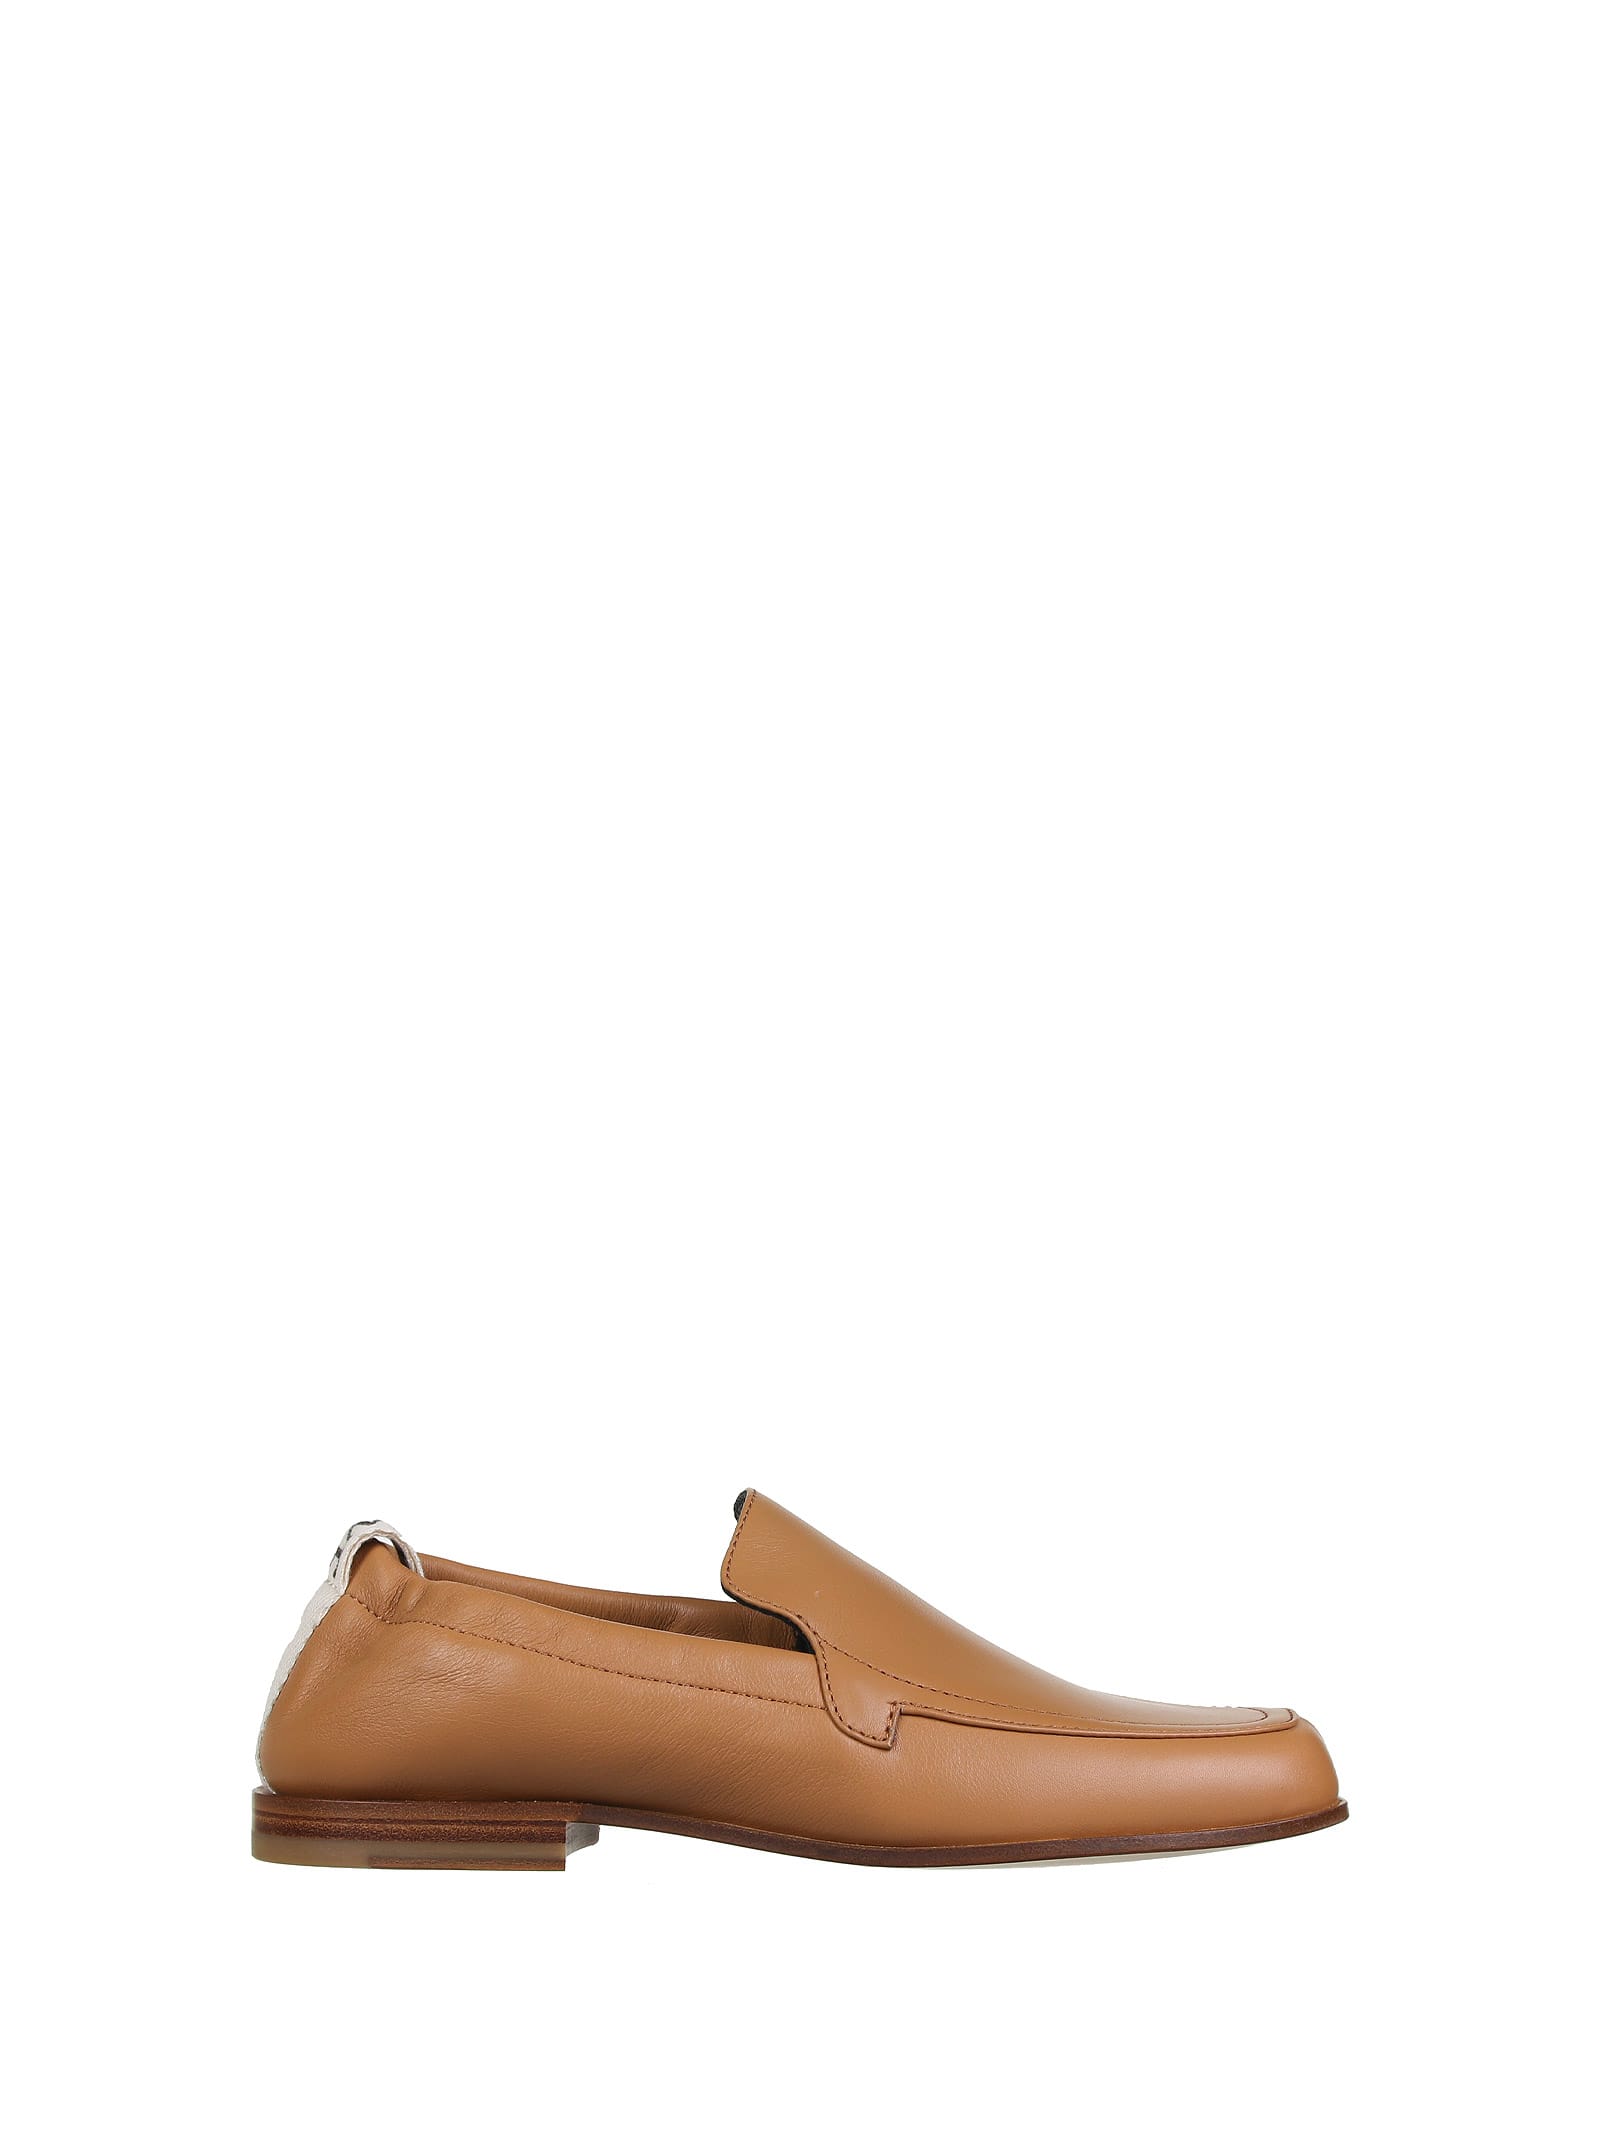 LOEWE CALF LEATHER SLIP-ON LOAFERS,L815290X05 2580